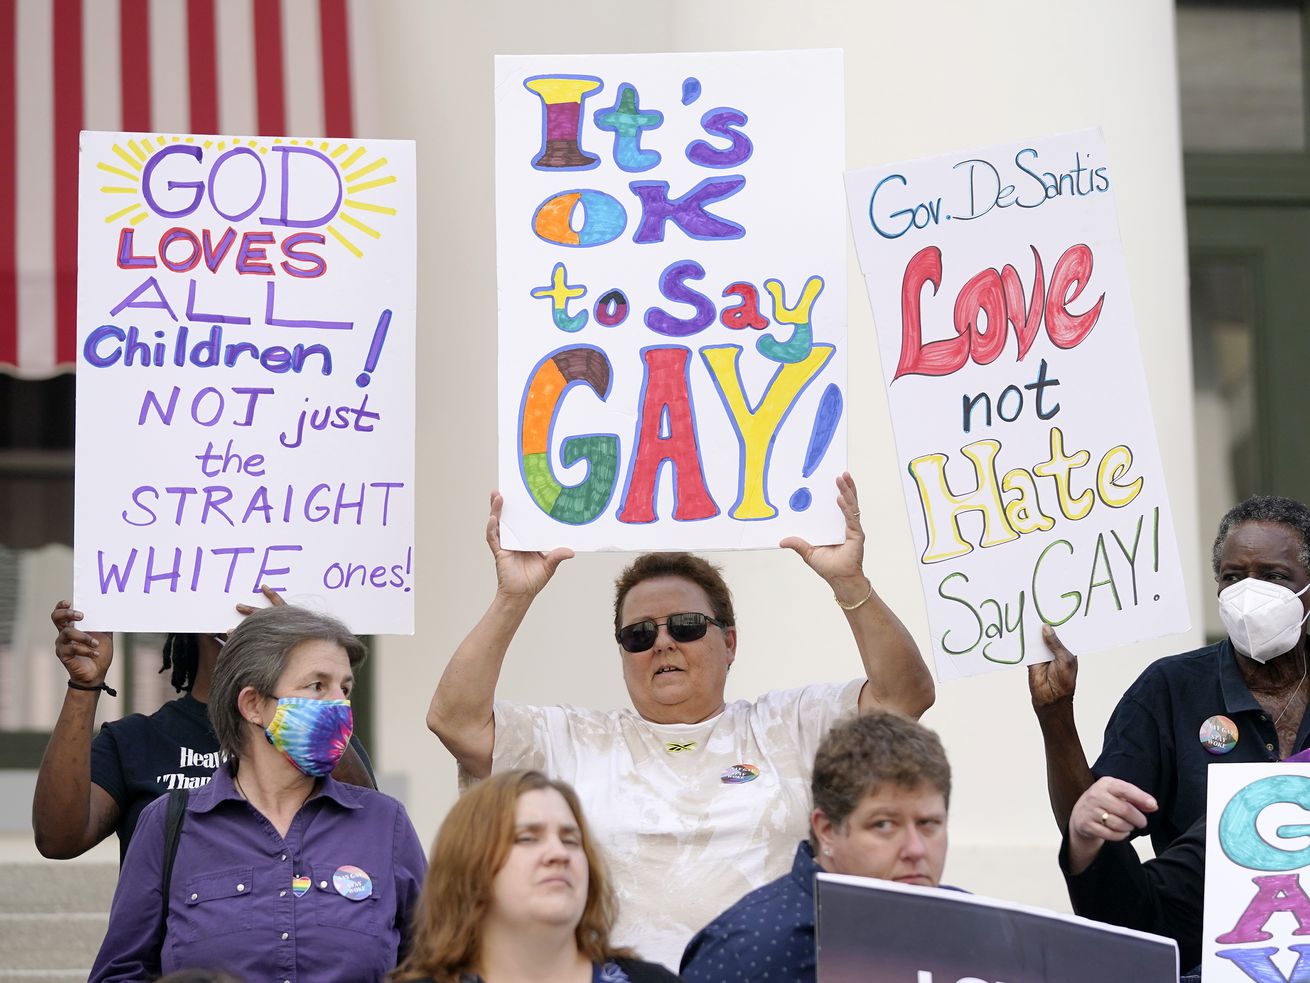 The right’s moral panic over “grooming” invokes age-old homophobia